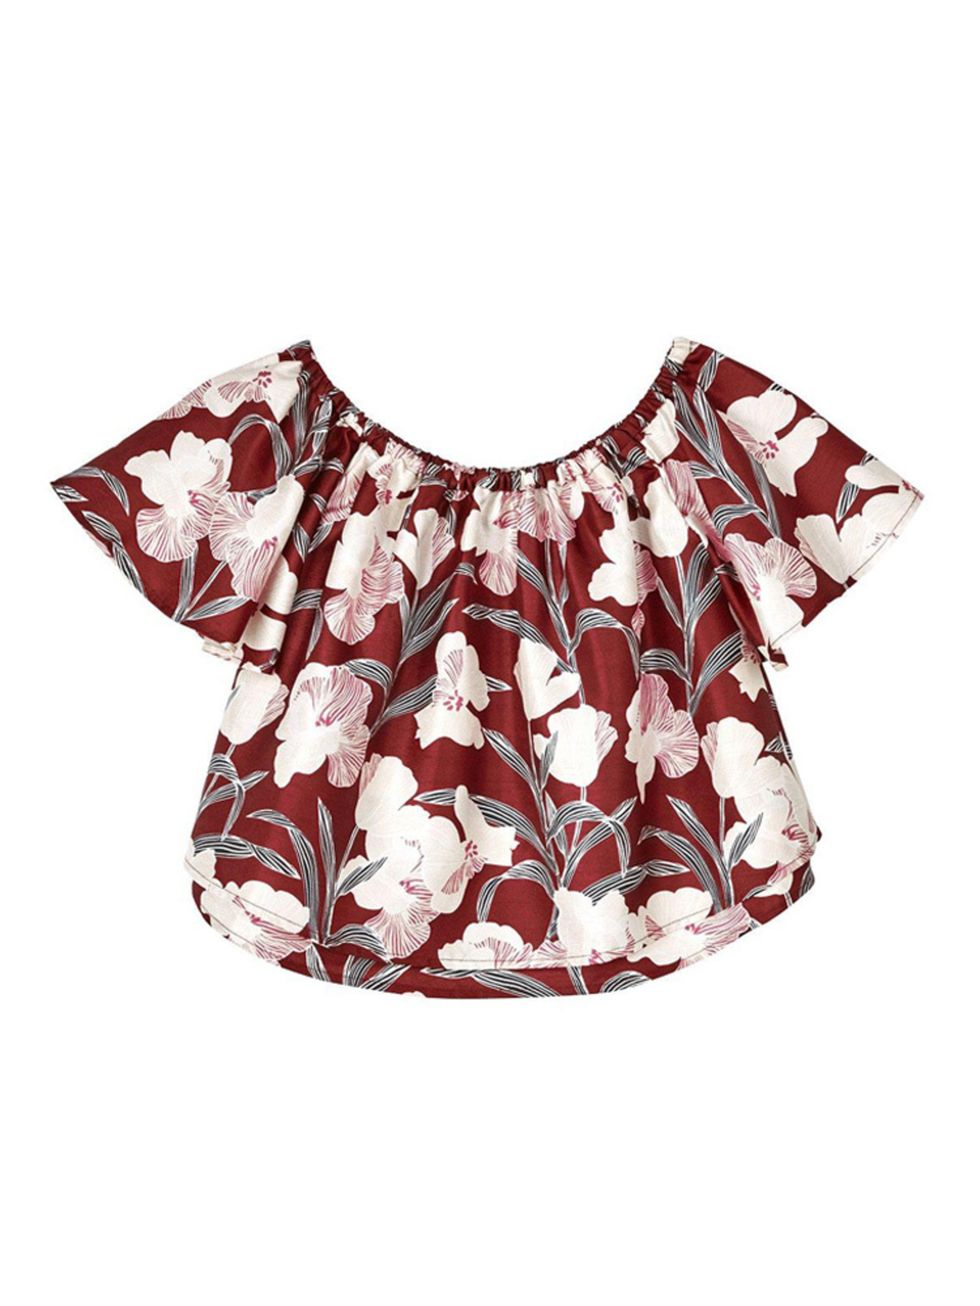 <p>Keep Sake Top, £100 at <a href="http://www.veryexclusive.co.uk/keepsake-foundations-floral-print-off-shoulder-top-burgundy/1600047806.prd" target="_blank">veryexclusive.co.uk </a></p>

<p>Wear now: layer a black lace top underneath this and wear with v